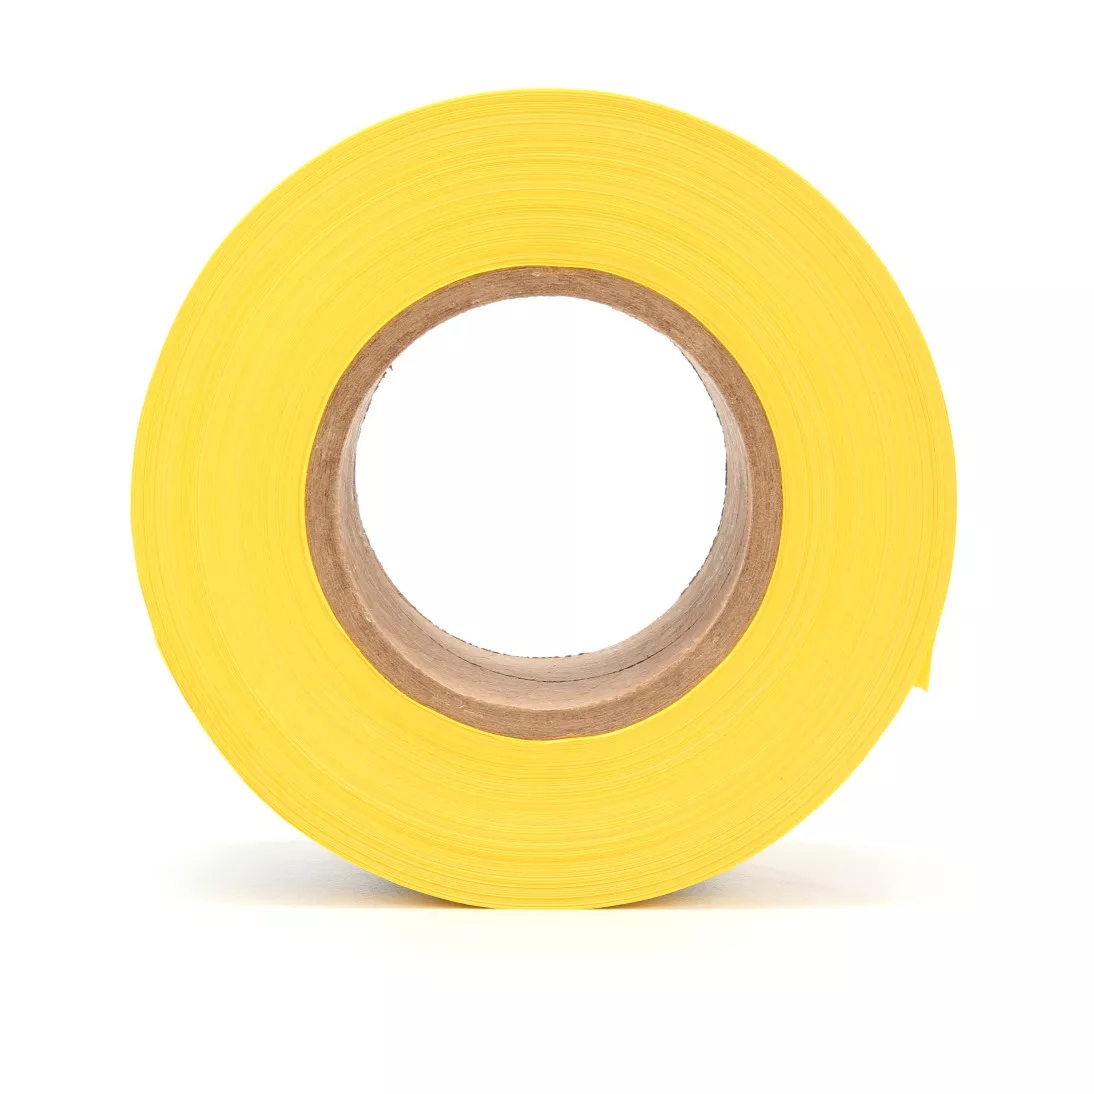 Scotch® Barricade Tape 358, CAUTION HIGH VOLTAGE, 3 in x 1000 ft,
Yellow, 8 rolls/Case